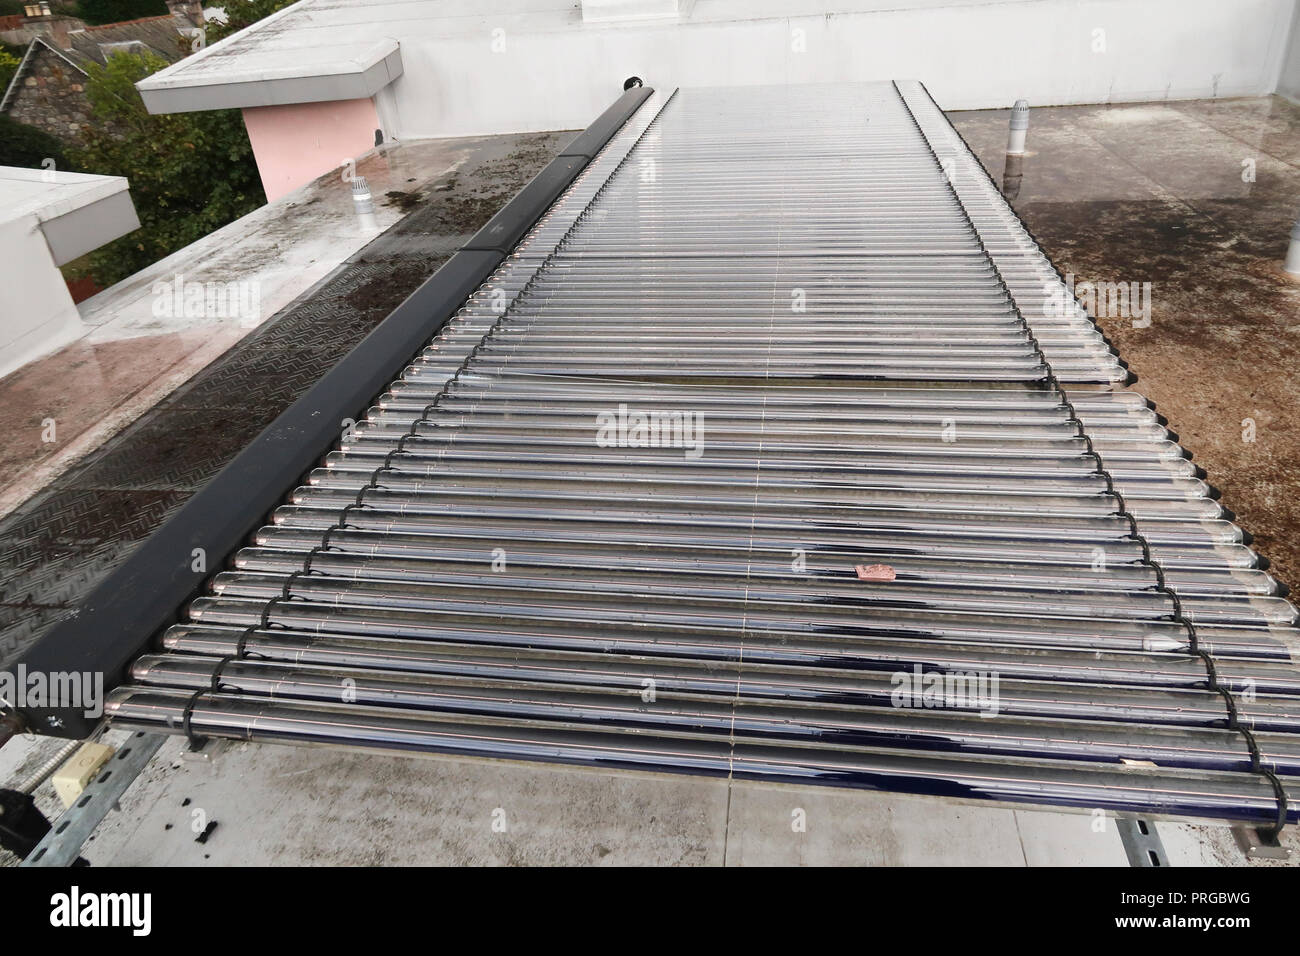 Solar water heating tubes on building roof Stock Photo